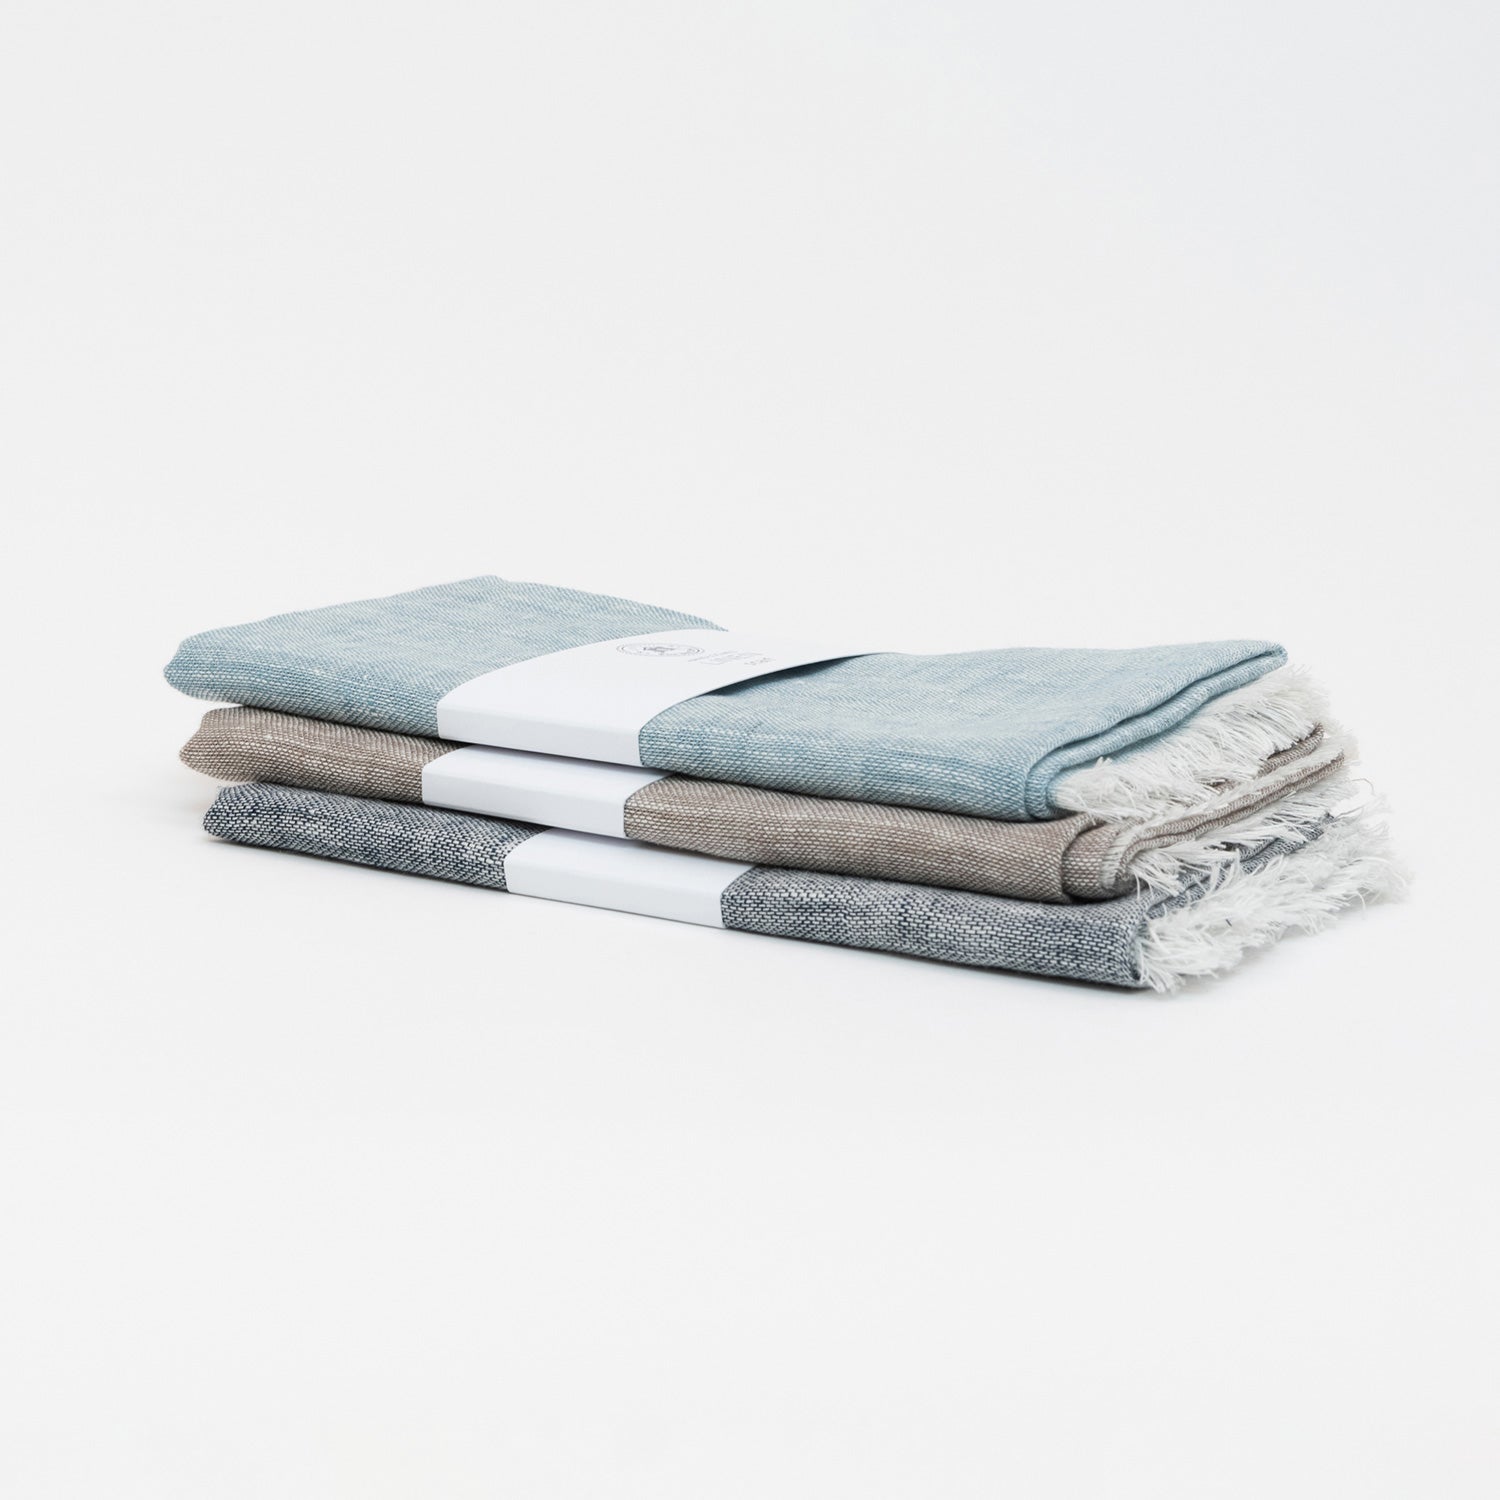 Three linen scarf colour variants piled on top of each other. Denim blue, sand, and sea blue.